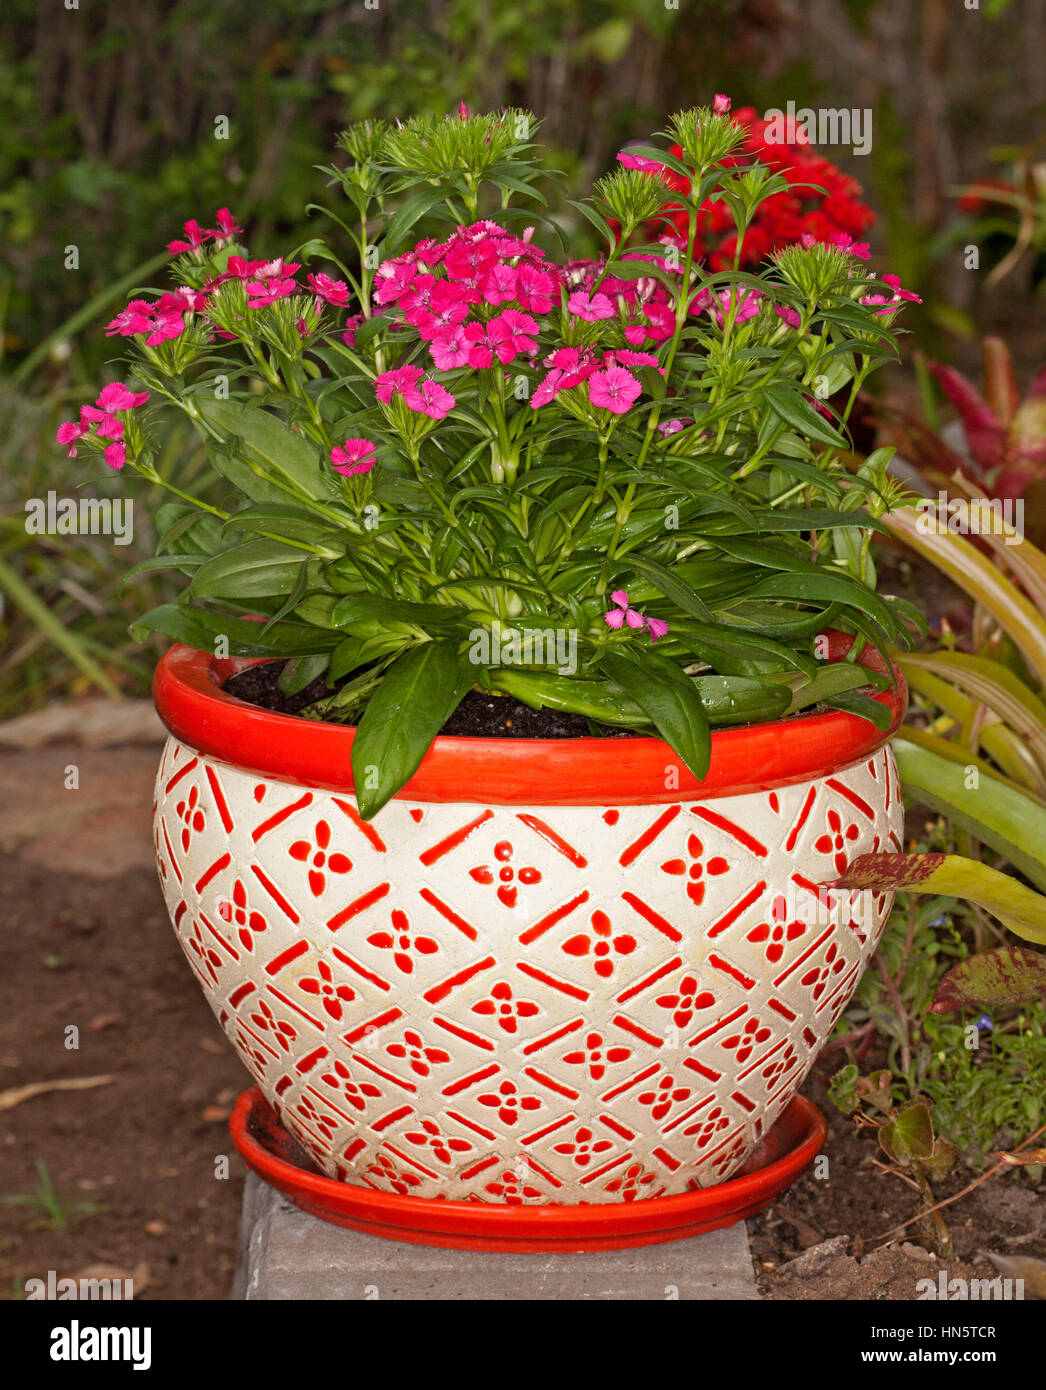 Dianthus barbatus interspecific 'Jolt' with cherry pink to red flowers in decorative ceramic pot with stunning orange and white geometric design Stock Photo